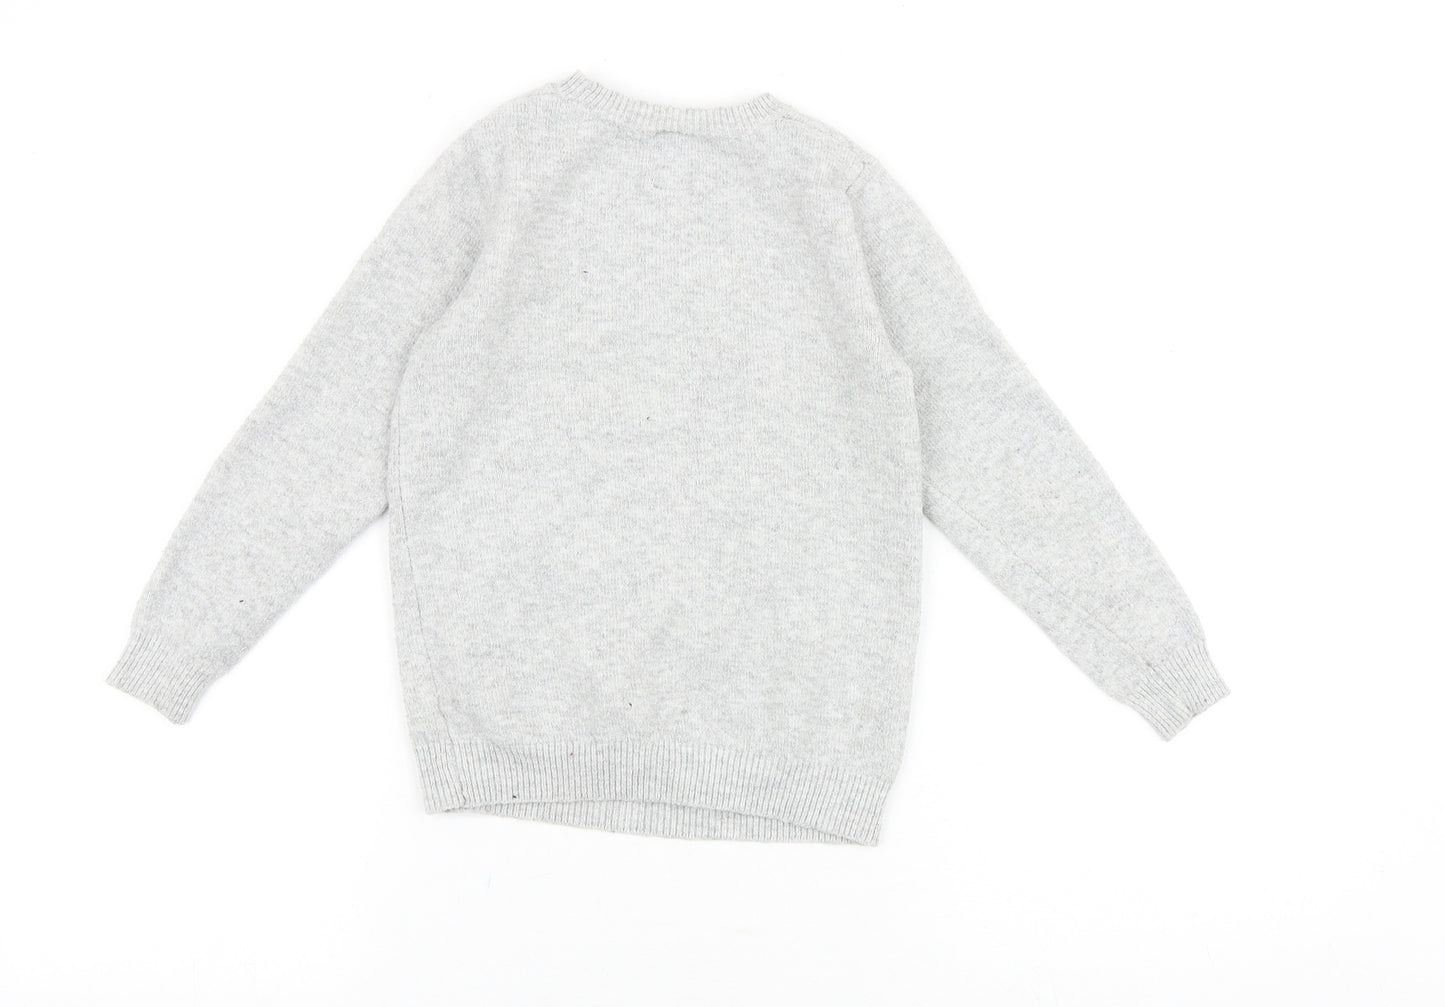 George Girls Grey Round Neck Cotton Pullover Jumper Size 7-8 Years Pullover - Christmas Penguin and Polar Bear